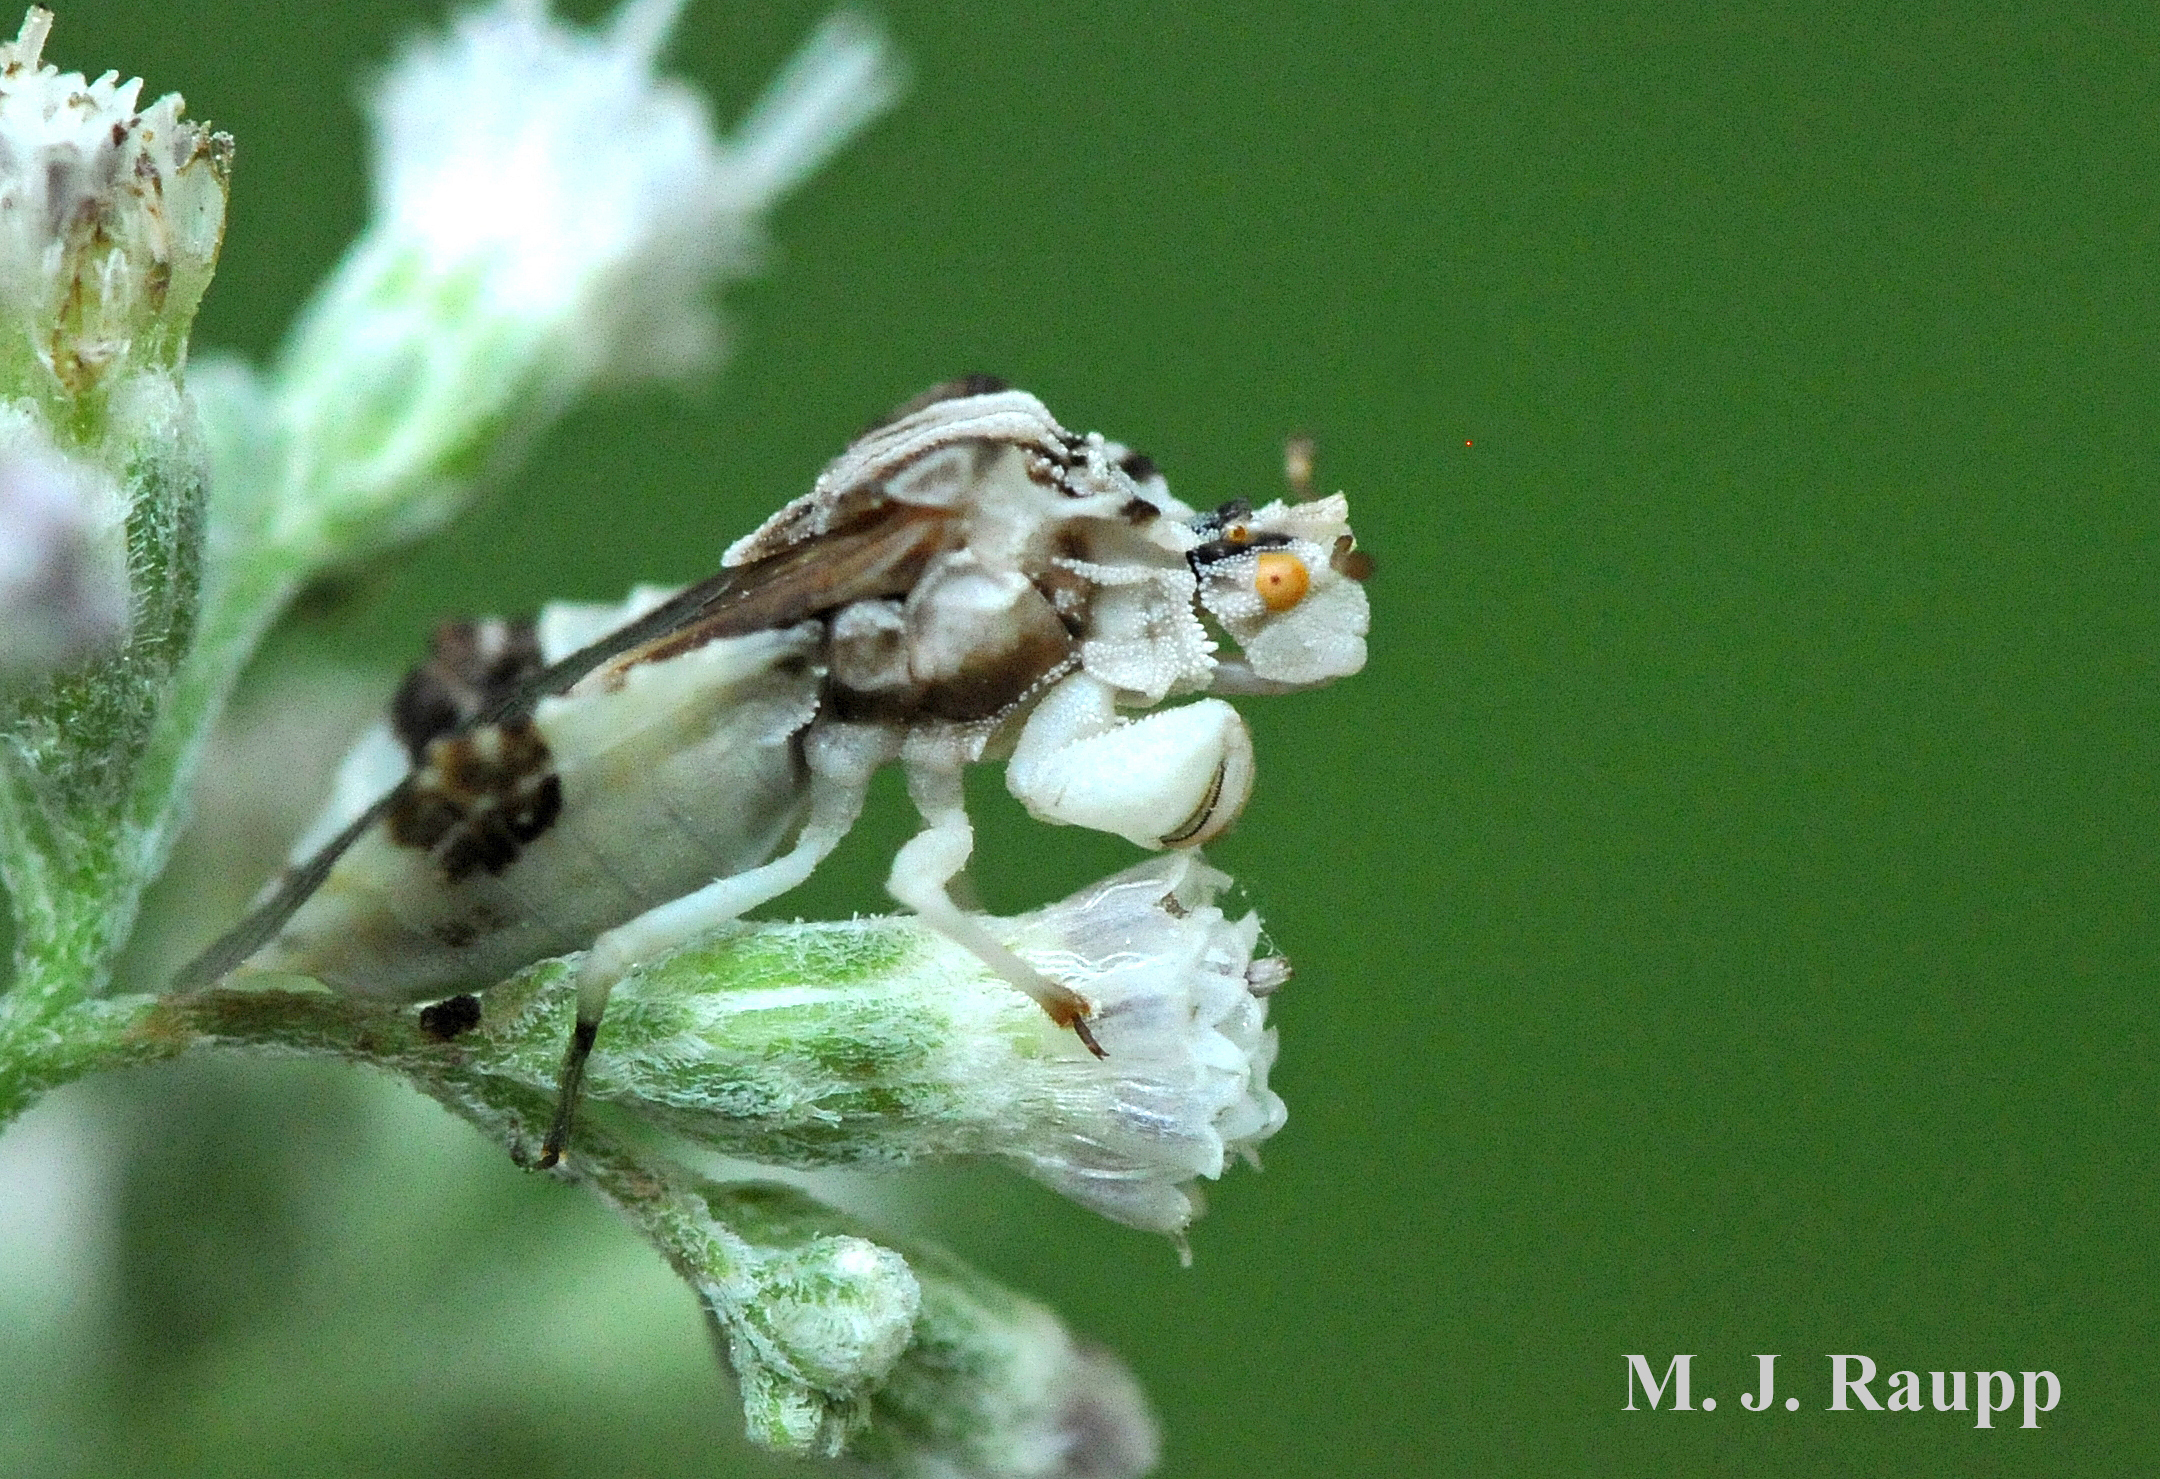 Ambush bug's enlarged forelegs allow it to snare its victim